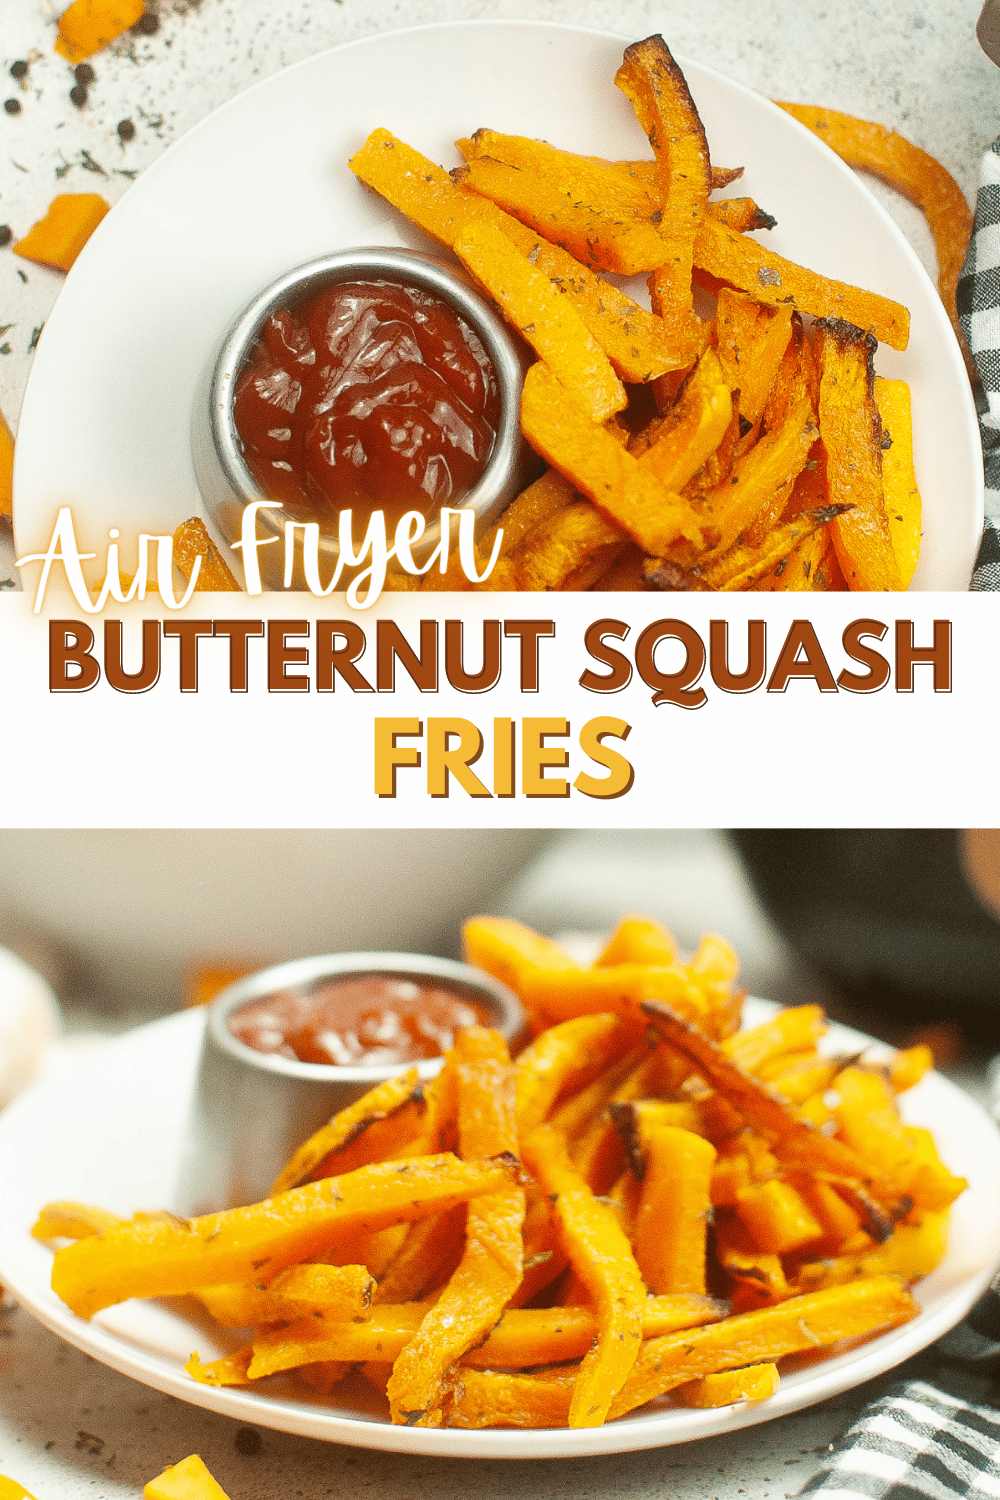 These air fryer butternut squash fries are a healthy and delicious alternative to traditional fried potatoes. They're a perfect side dish. #airfryerbutternutsquashfries #airfryer #butternutsquash #fries #butternutsquashfries via @wondermomwannab